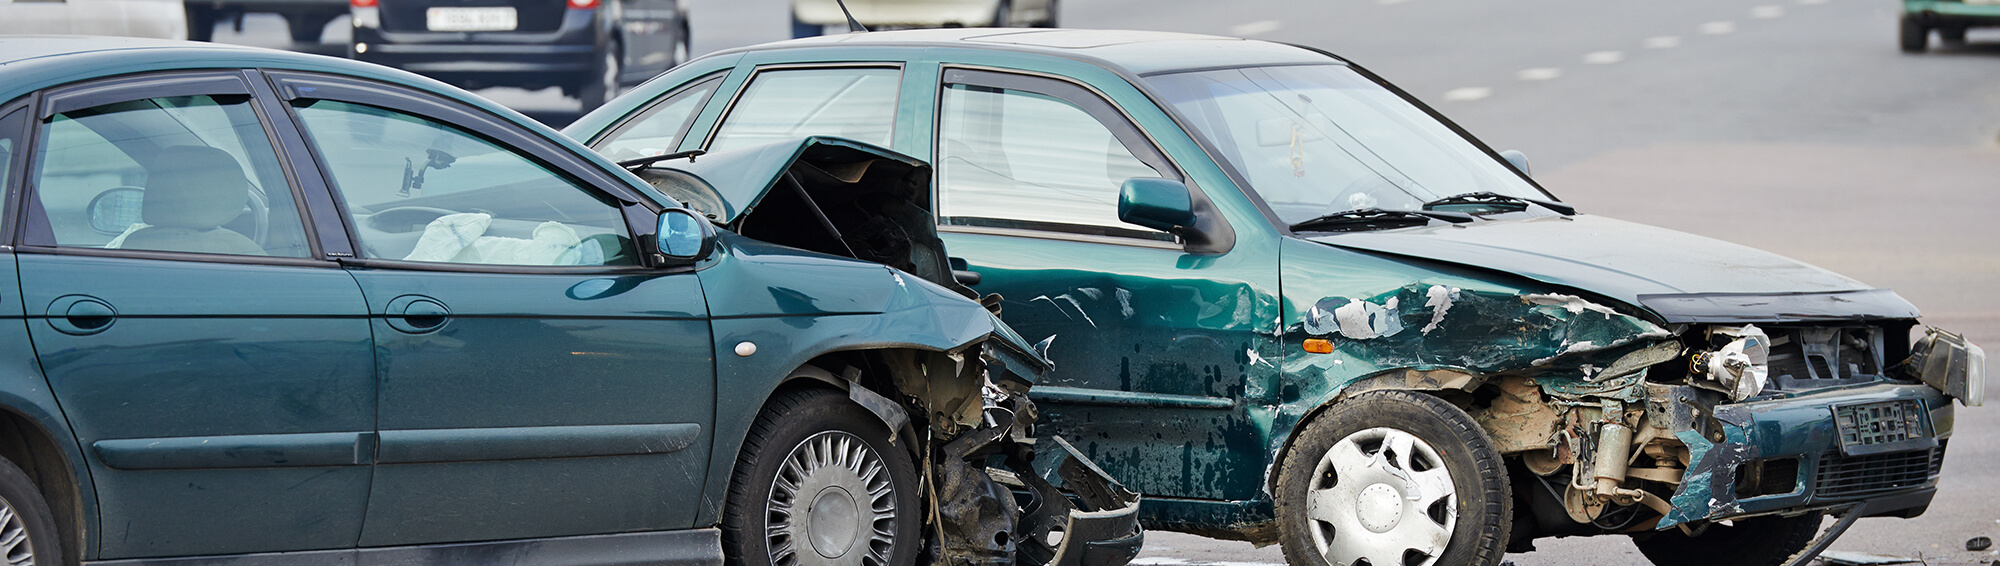 Tennessee’s Statute of Limitations for Auto Accident Claims Is Just One Year